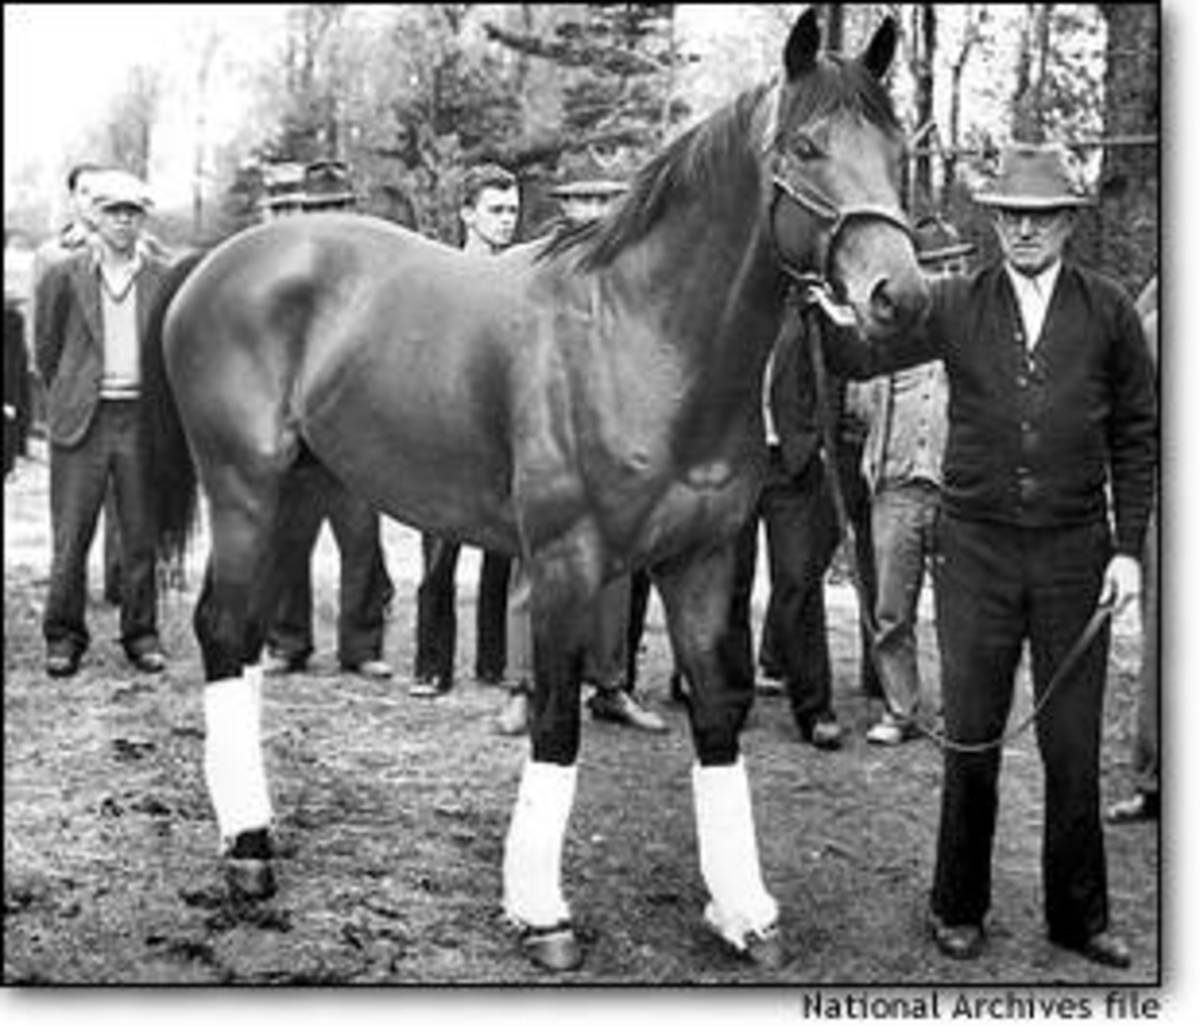 Seabiscuit was a racehorse, an underdog who gave people hope during the Great Depression.